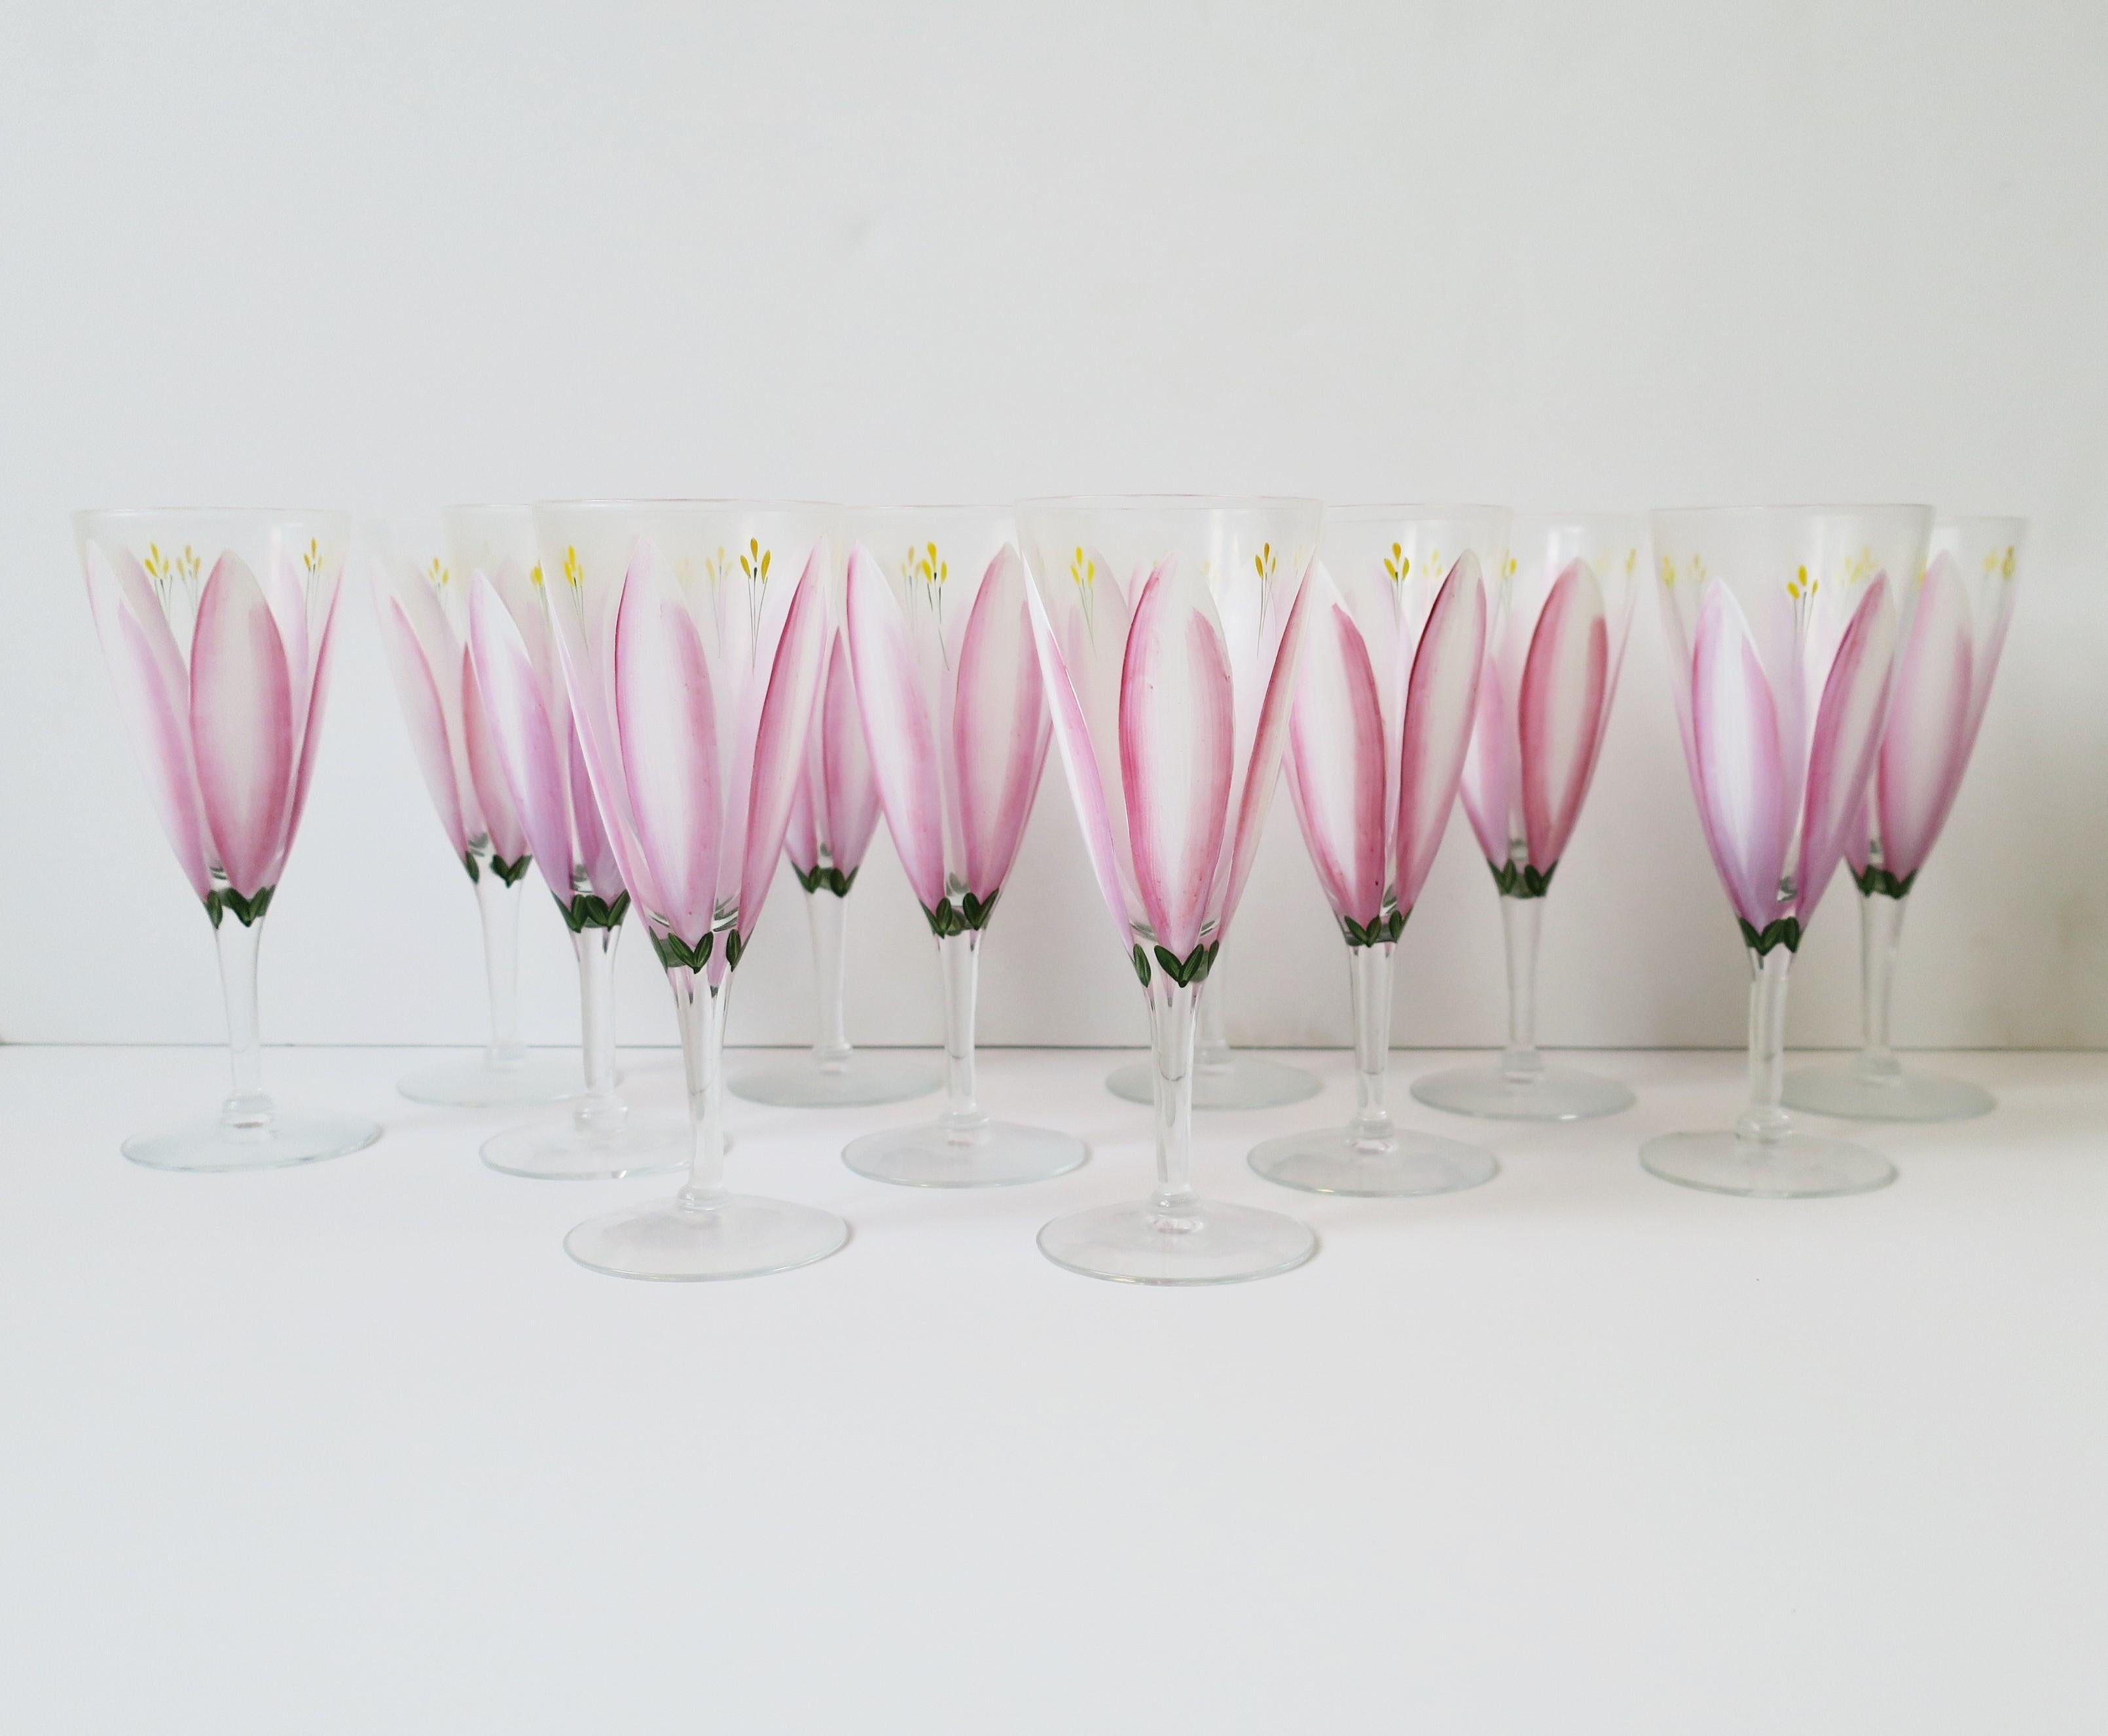 A gorgeous set of twelve (12) pink and white tulip Champagne flutes glasses, circa late-20th century, Europe. Glasses are beautiful, hand-painted in pink, white, and a touch of yellow and green hues. Together, glasses look like a beautiful garden of